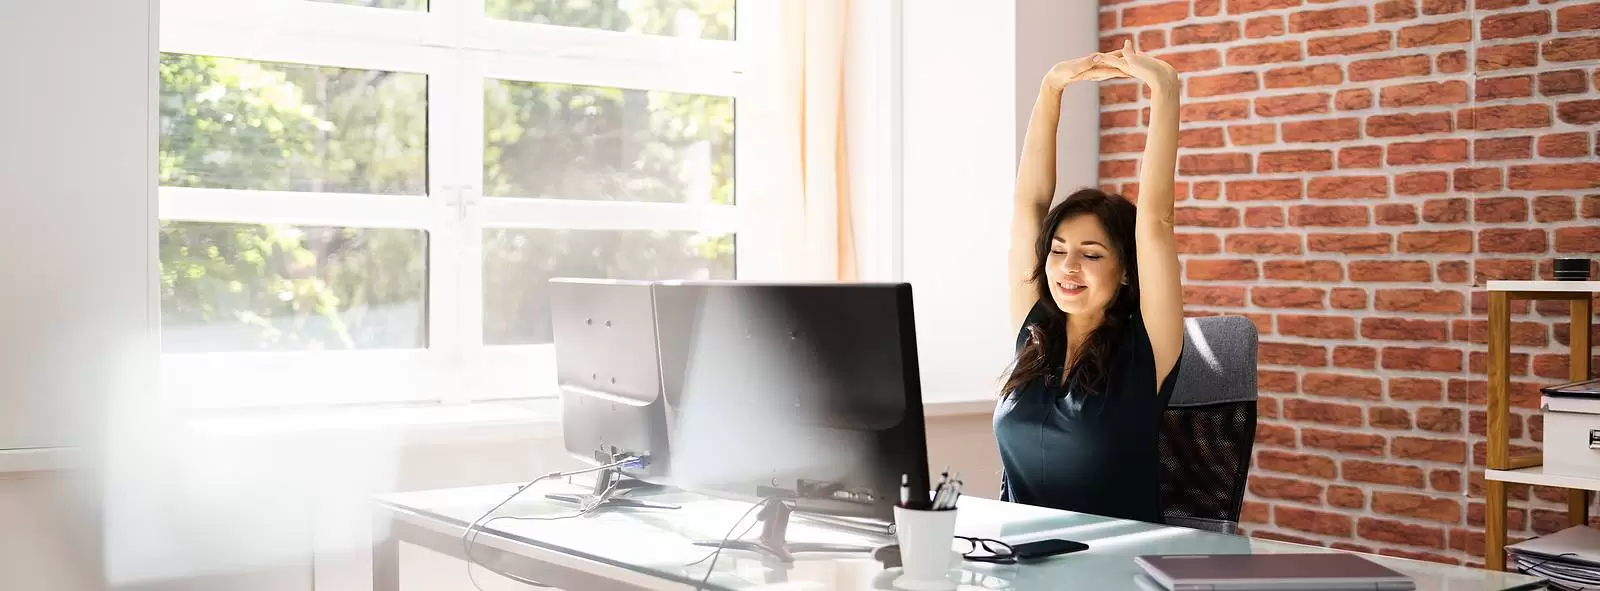 Desk Stretch Exercise. Woman Stretching At Work In Office